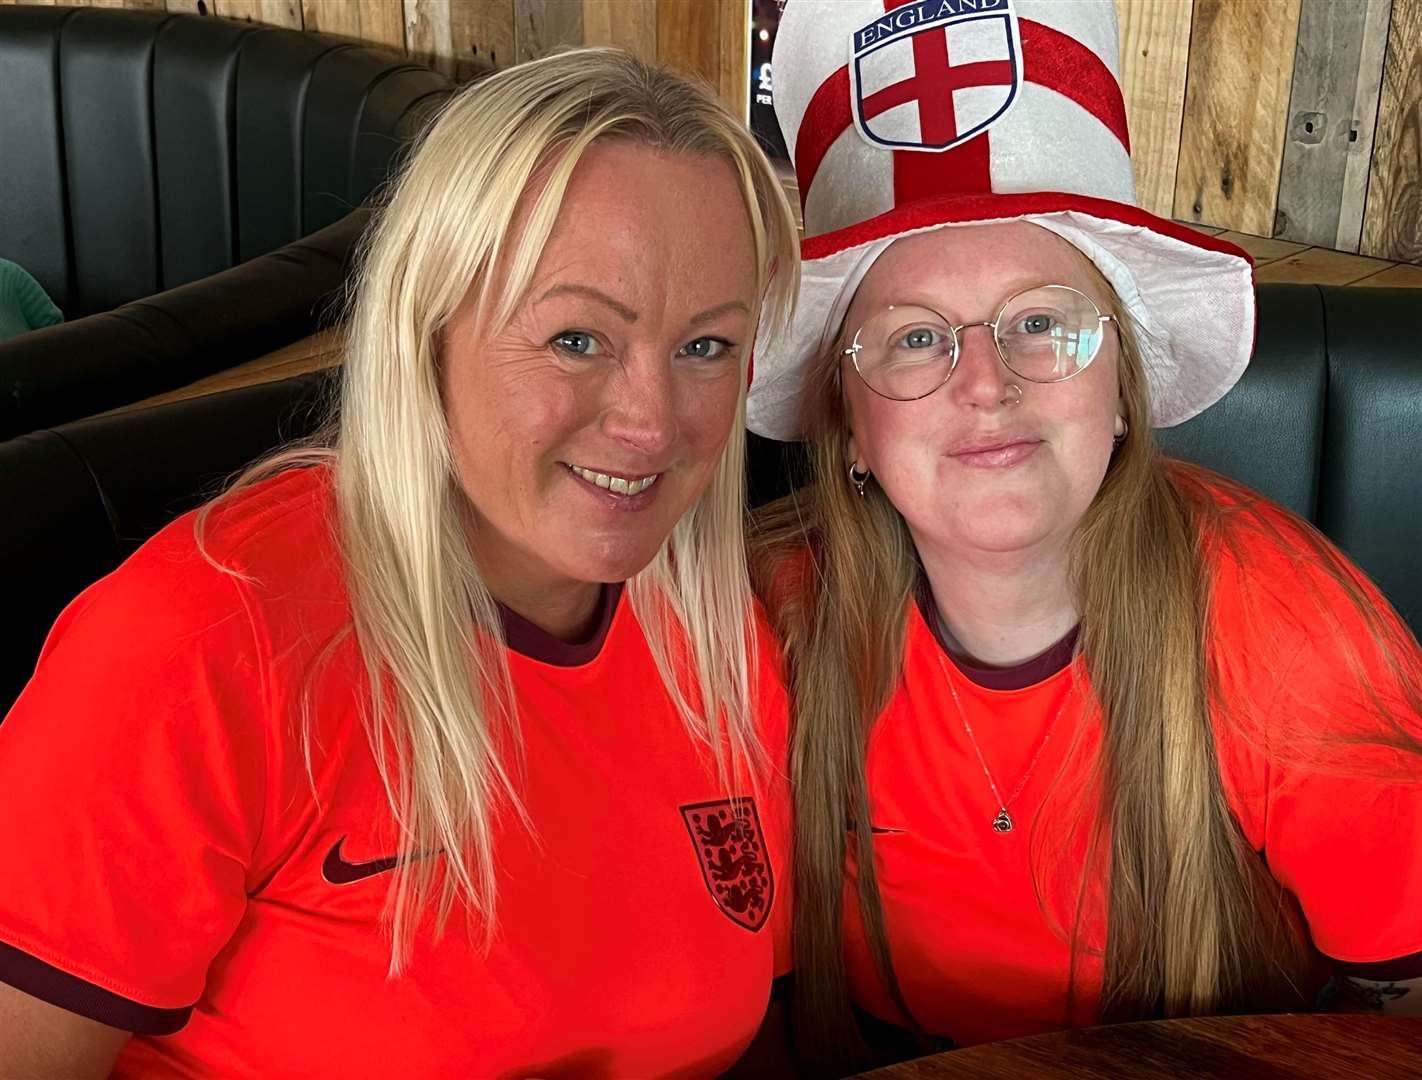 Mandy Brown, left, and Gillingham FC’s Her Game Too ambassador Paige Collins, right, watched the game at Chatham Town FC